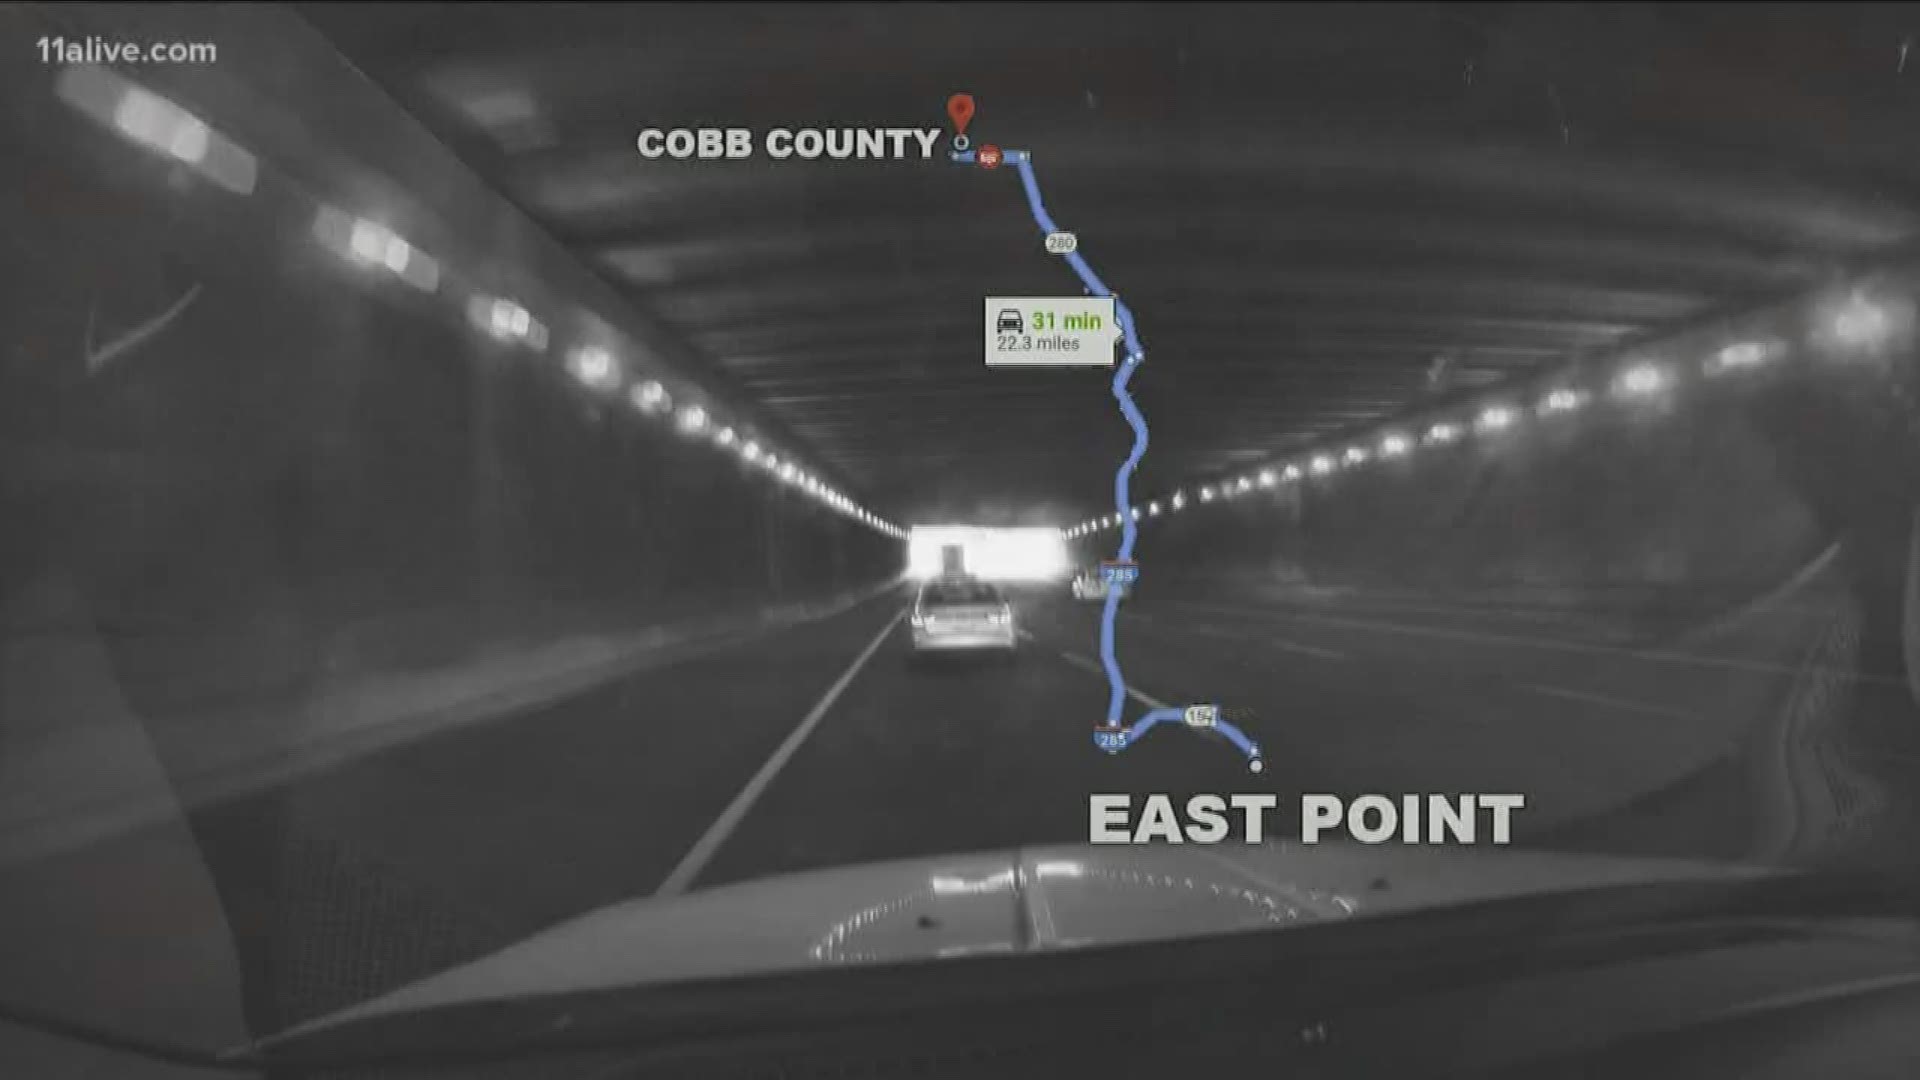 The 19-year-old said the Uber driver picked her up from a friend's home to take her to destination in Cobb County. But within minutes, she said she felt uneasy.